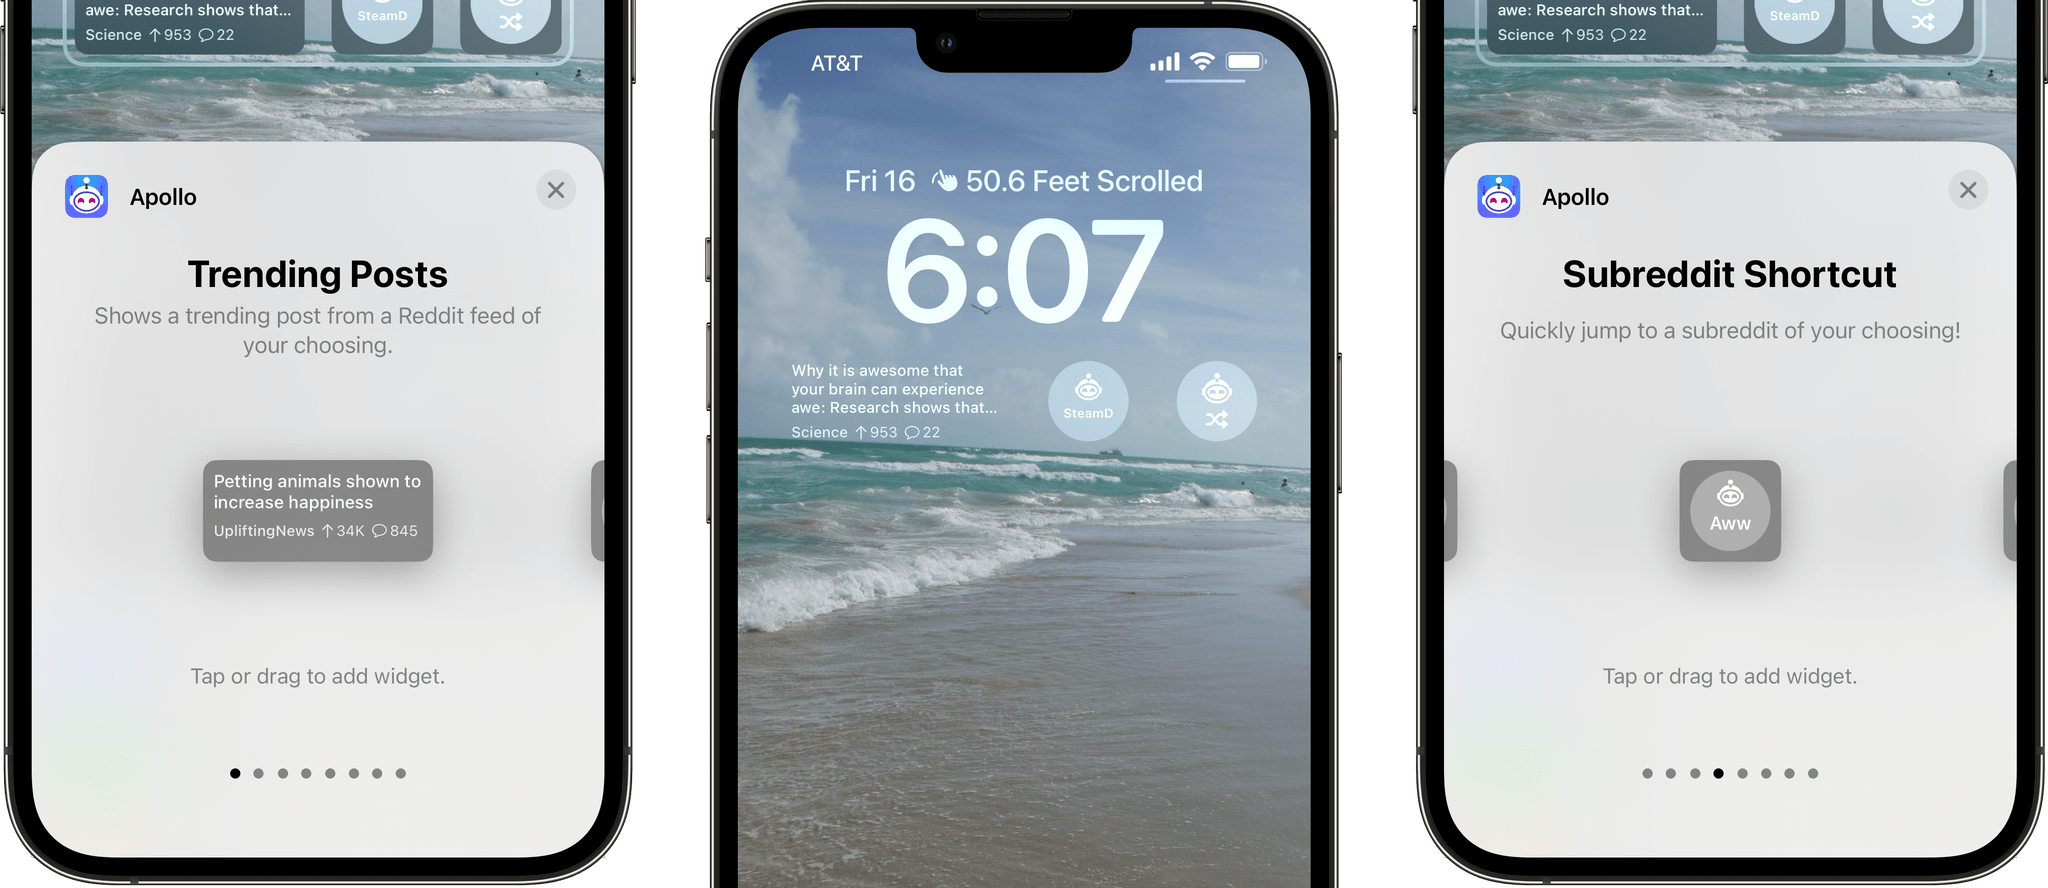 Apollo's strength is using Lock Screen widgets to link to your favorite parts of the app.